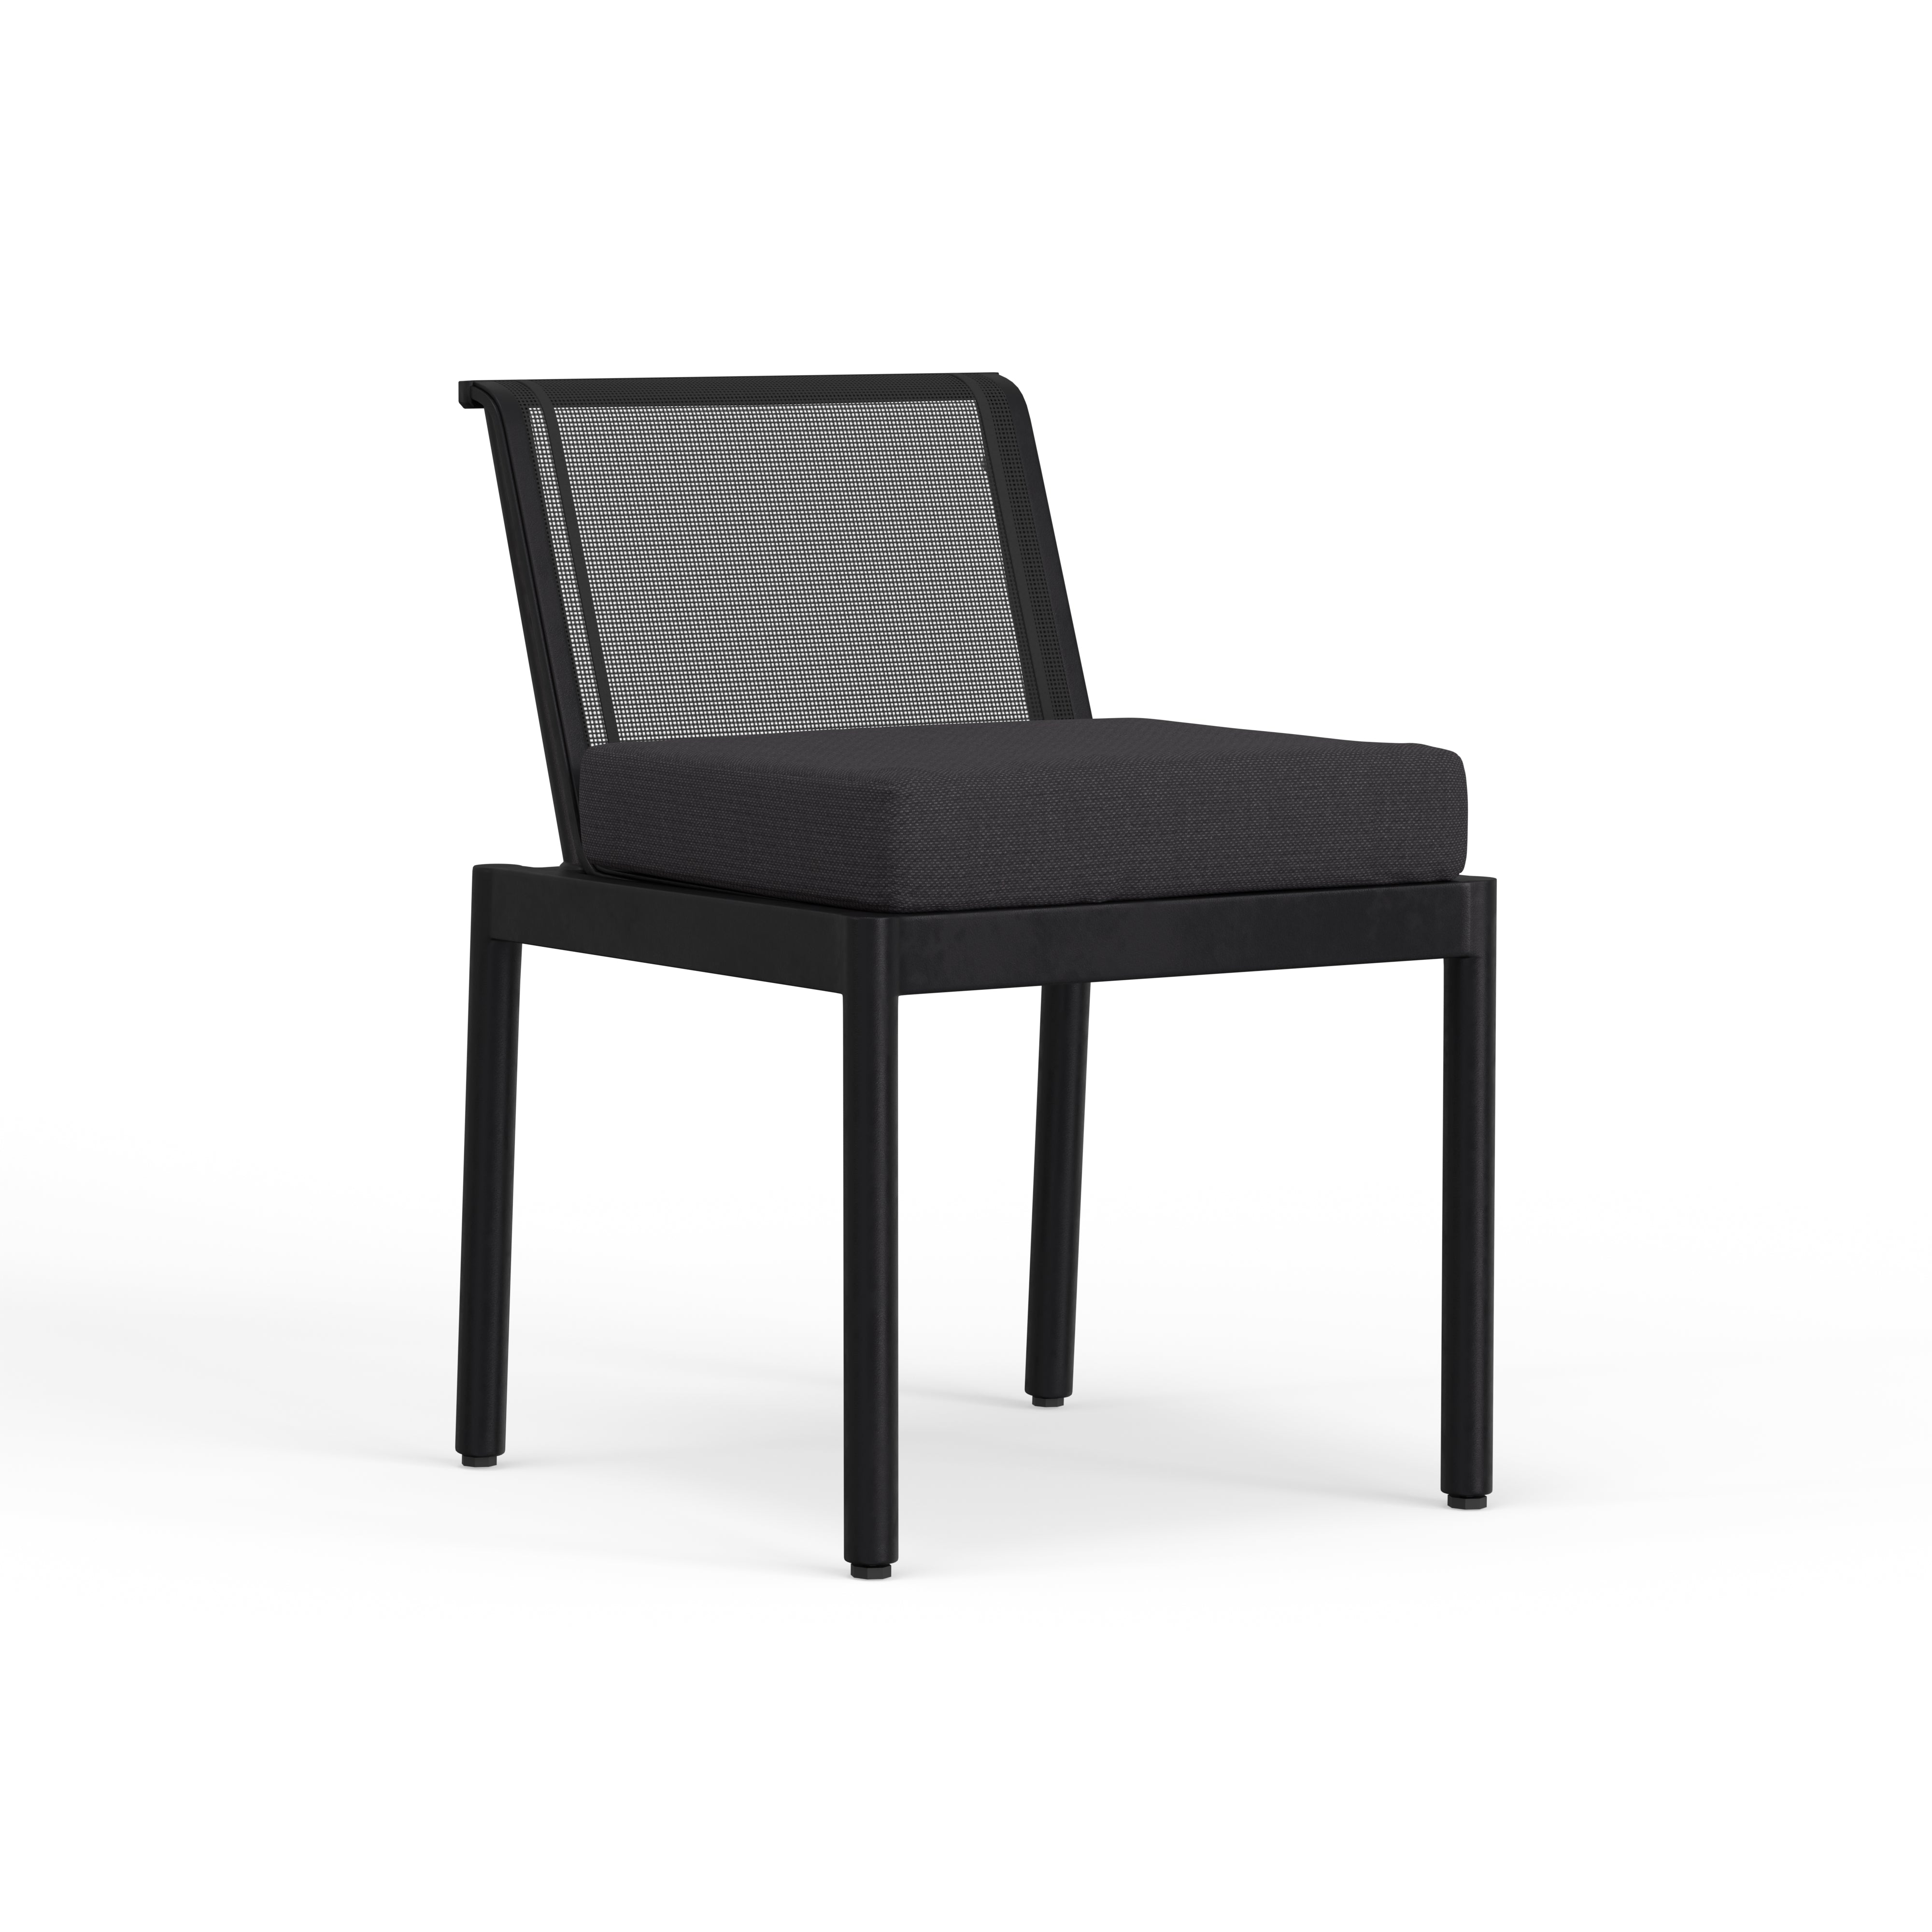 Modern Powder Coated Aluminum Outdoor Furniture Perfect Side Dining Chair